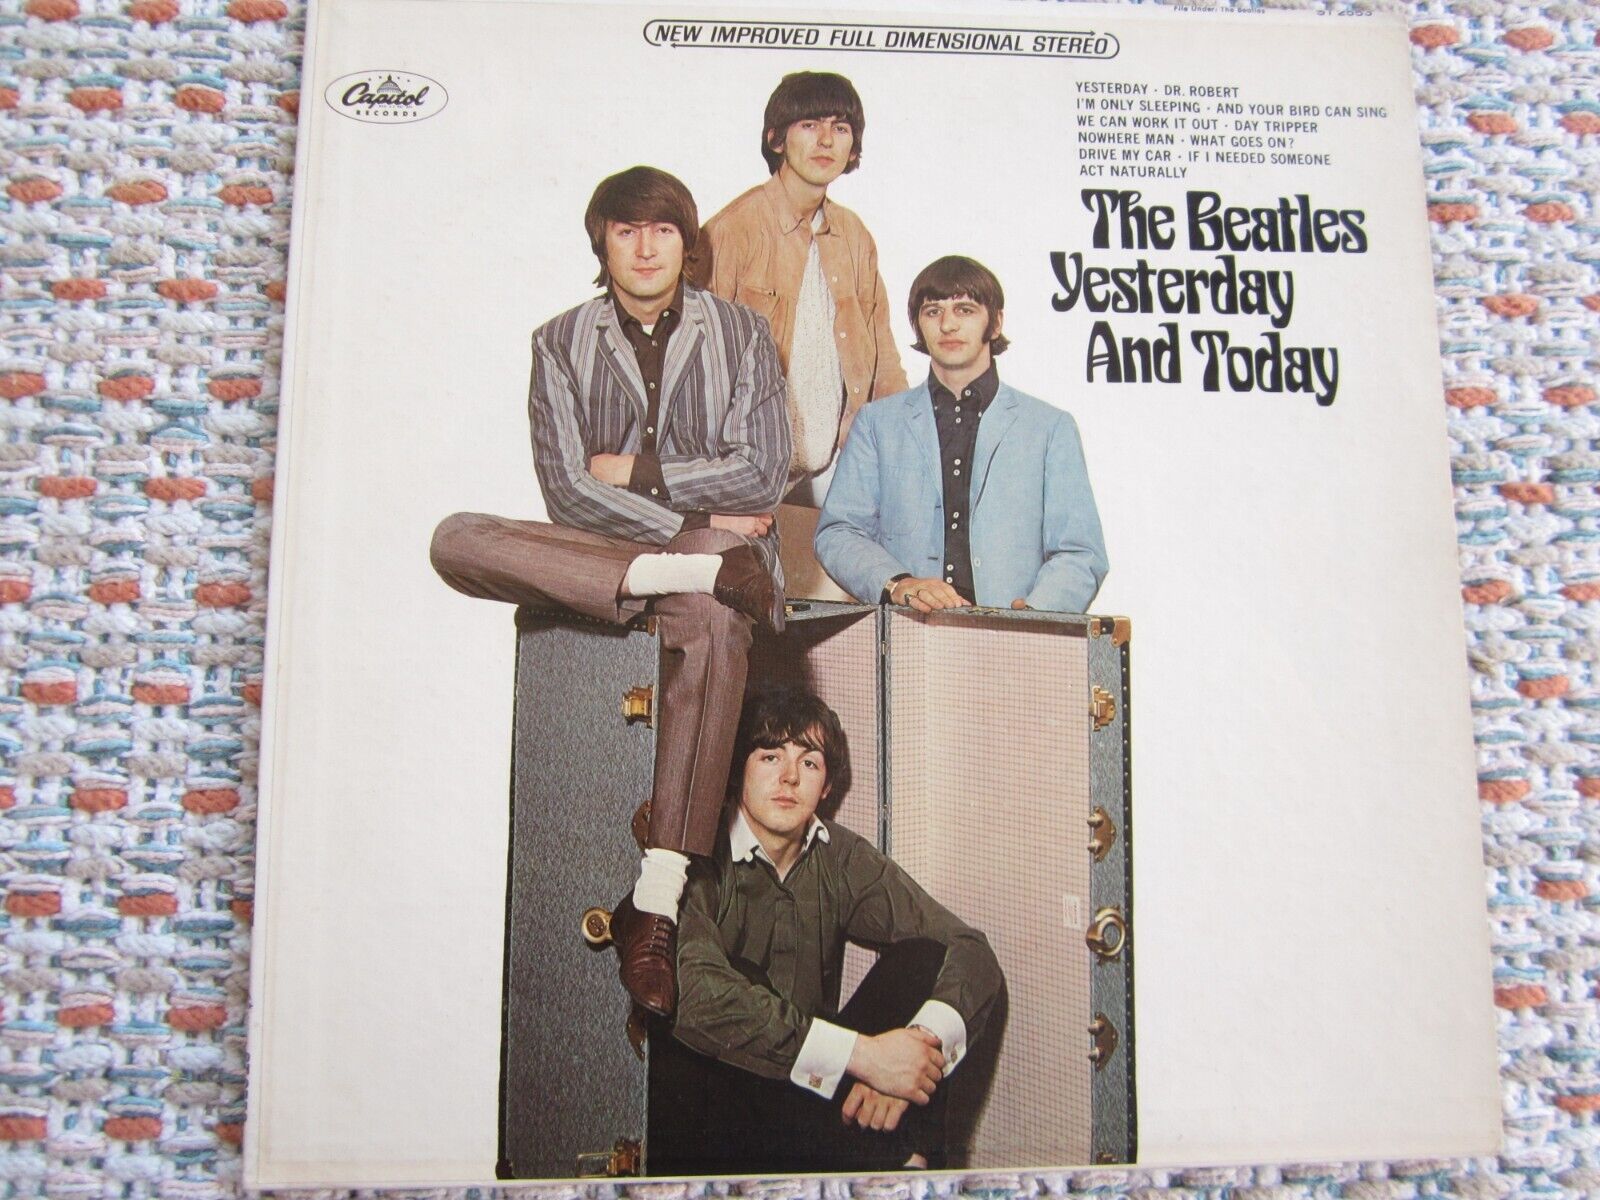 Pic 1 BEATLES CAPITOL STEREO SECOND STATE BUTCHER COVER 1966 BRIGHT WHITE RARE NMINT